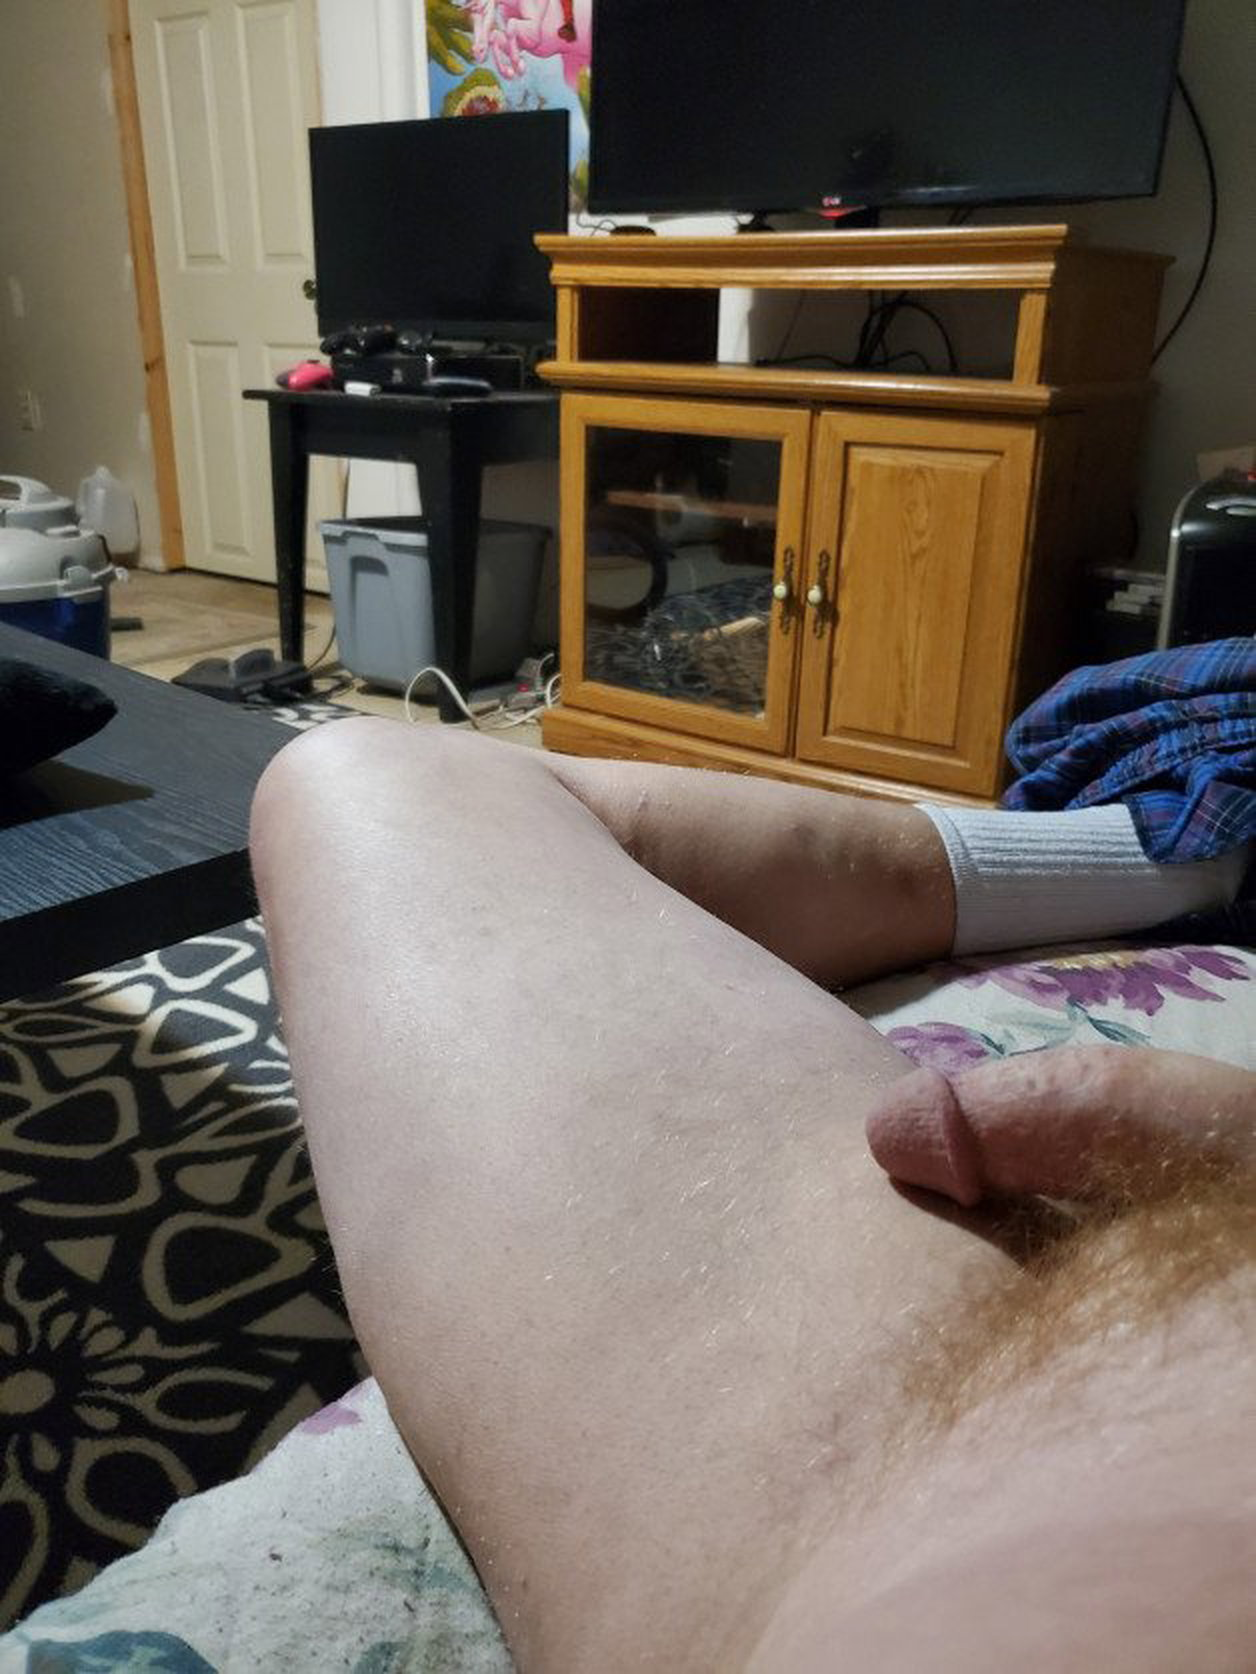 Photo by jayroth492 with the username @jayroth492,  February 16, 2021 at 3:18 AM. The post is about the topic Mature and the text says 'I'm so horny tonight, can anyone help me'